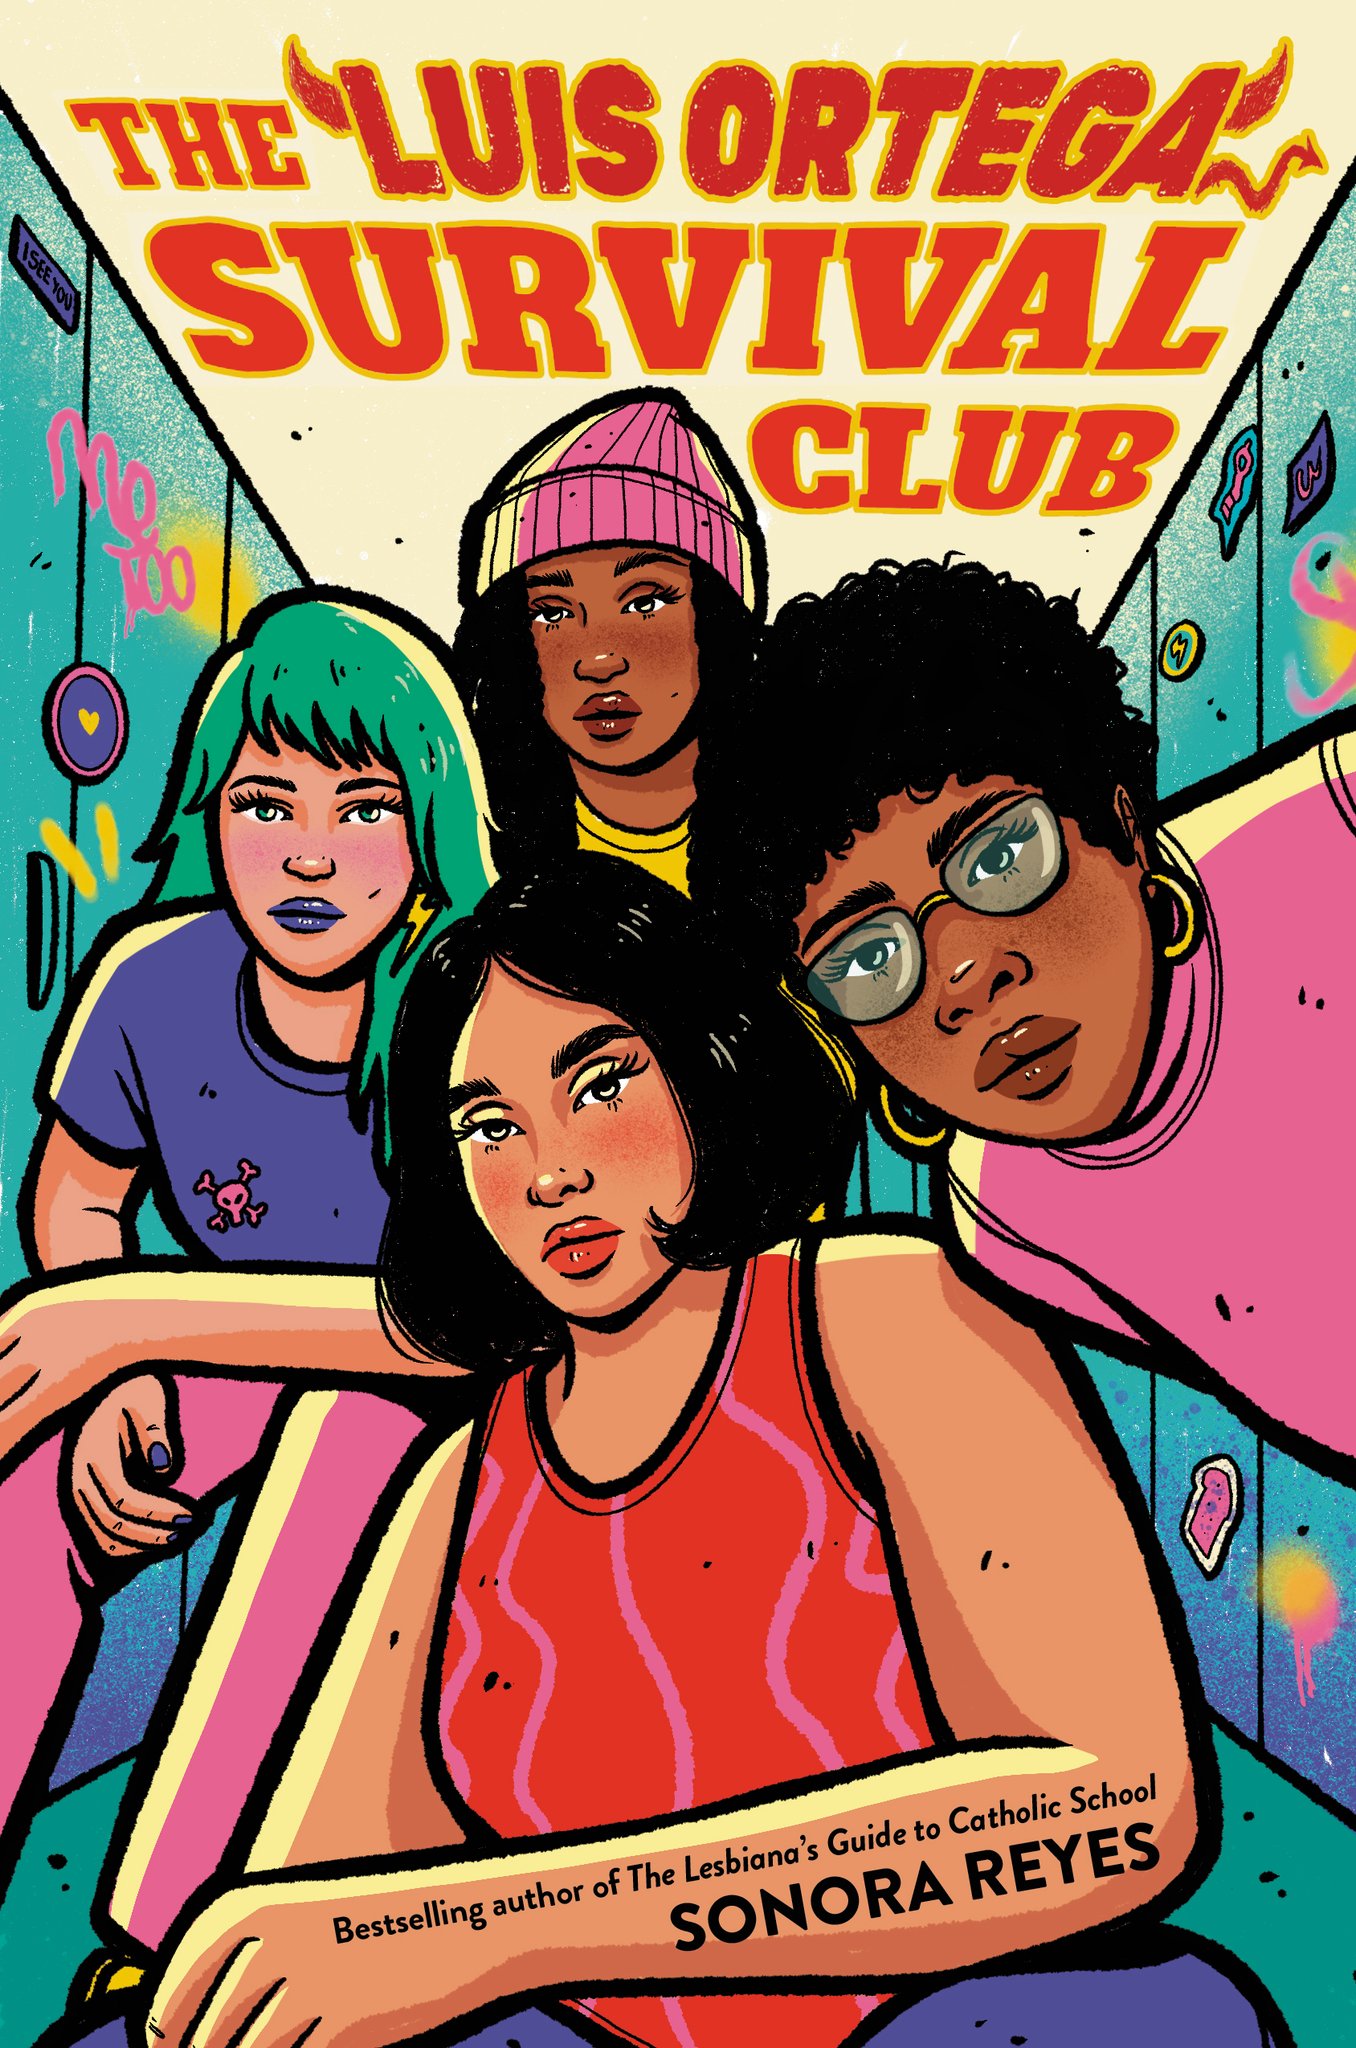 cover of The Luis Ortega Survival Club by Sonora Reyes